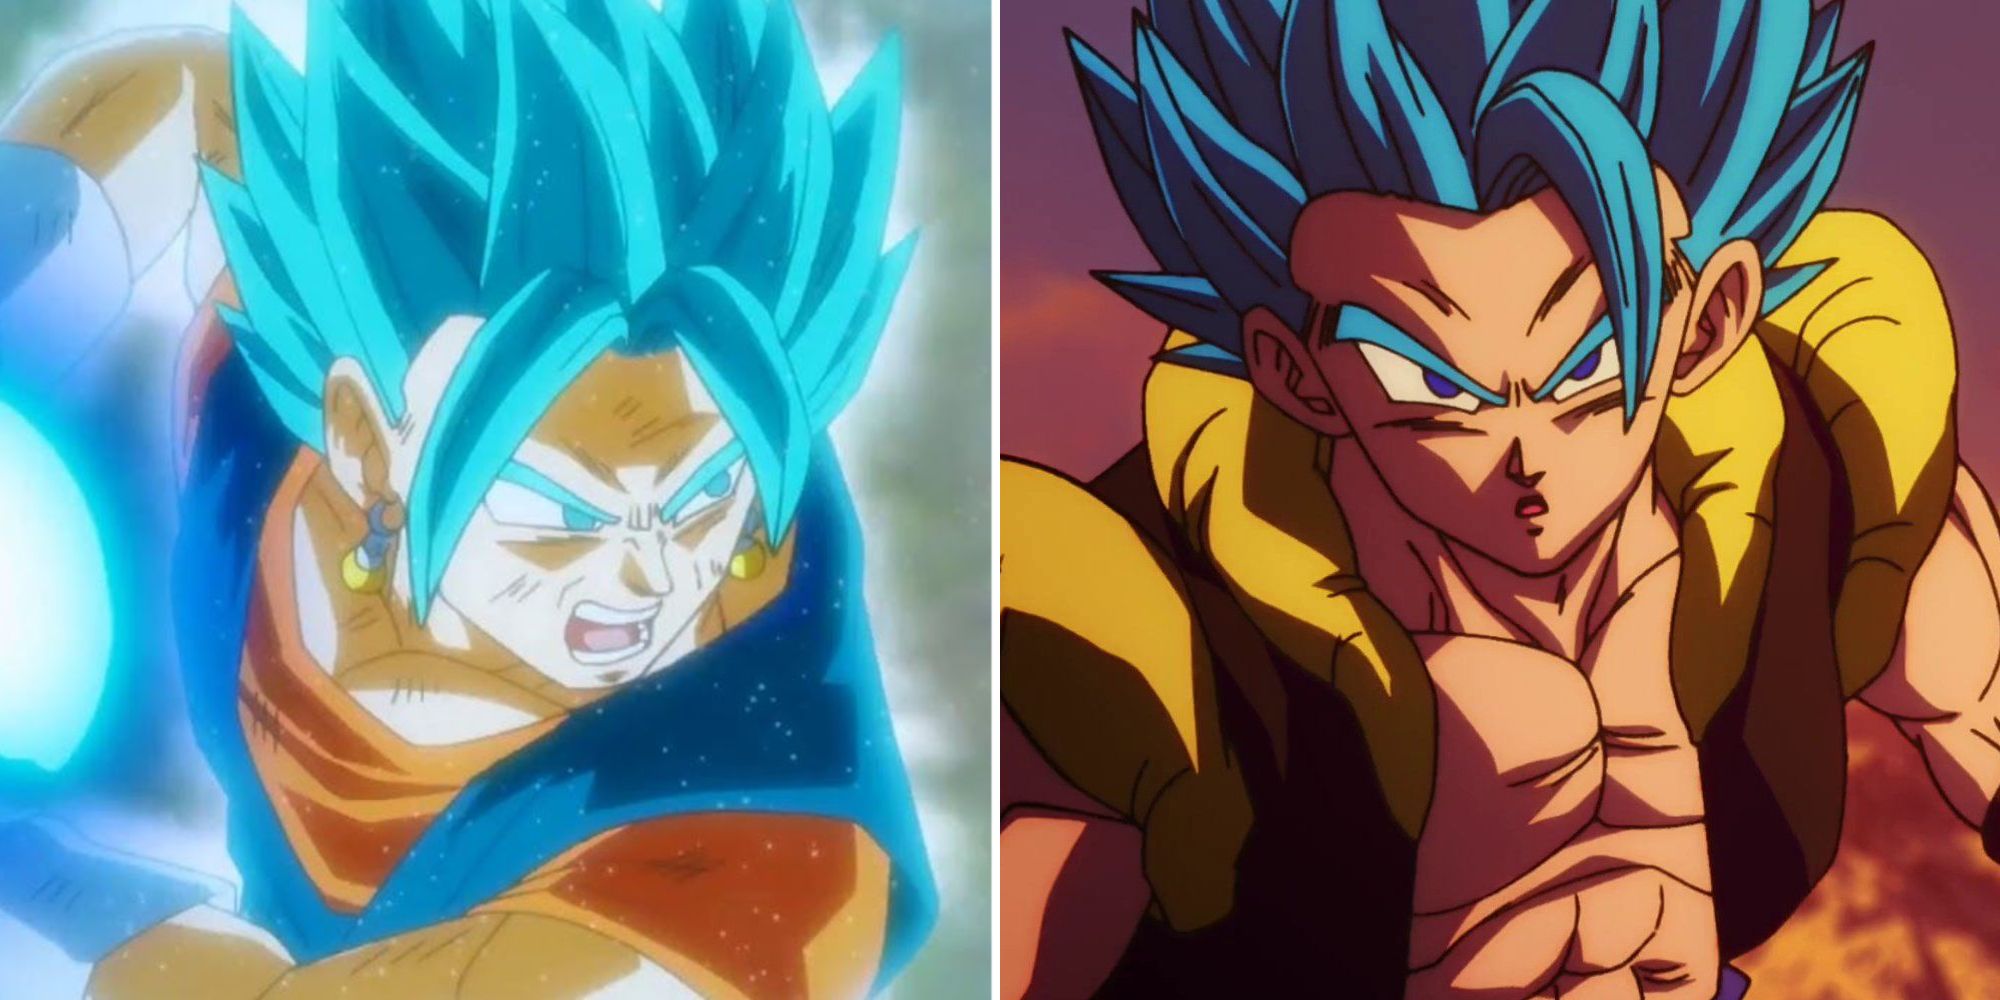 Vegito charging a Final Kamehameha in Dragon Ball Super and Gogeta after landing an attack in Dragon Ball Super Broly